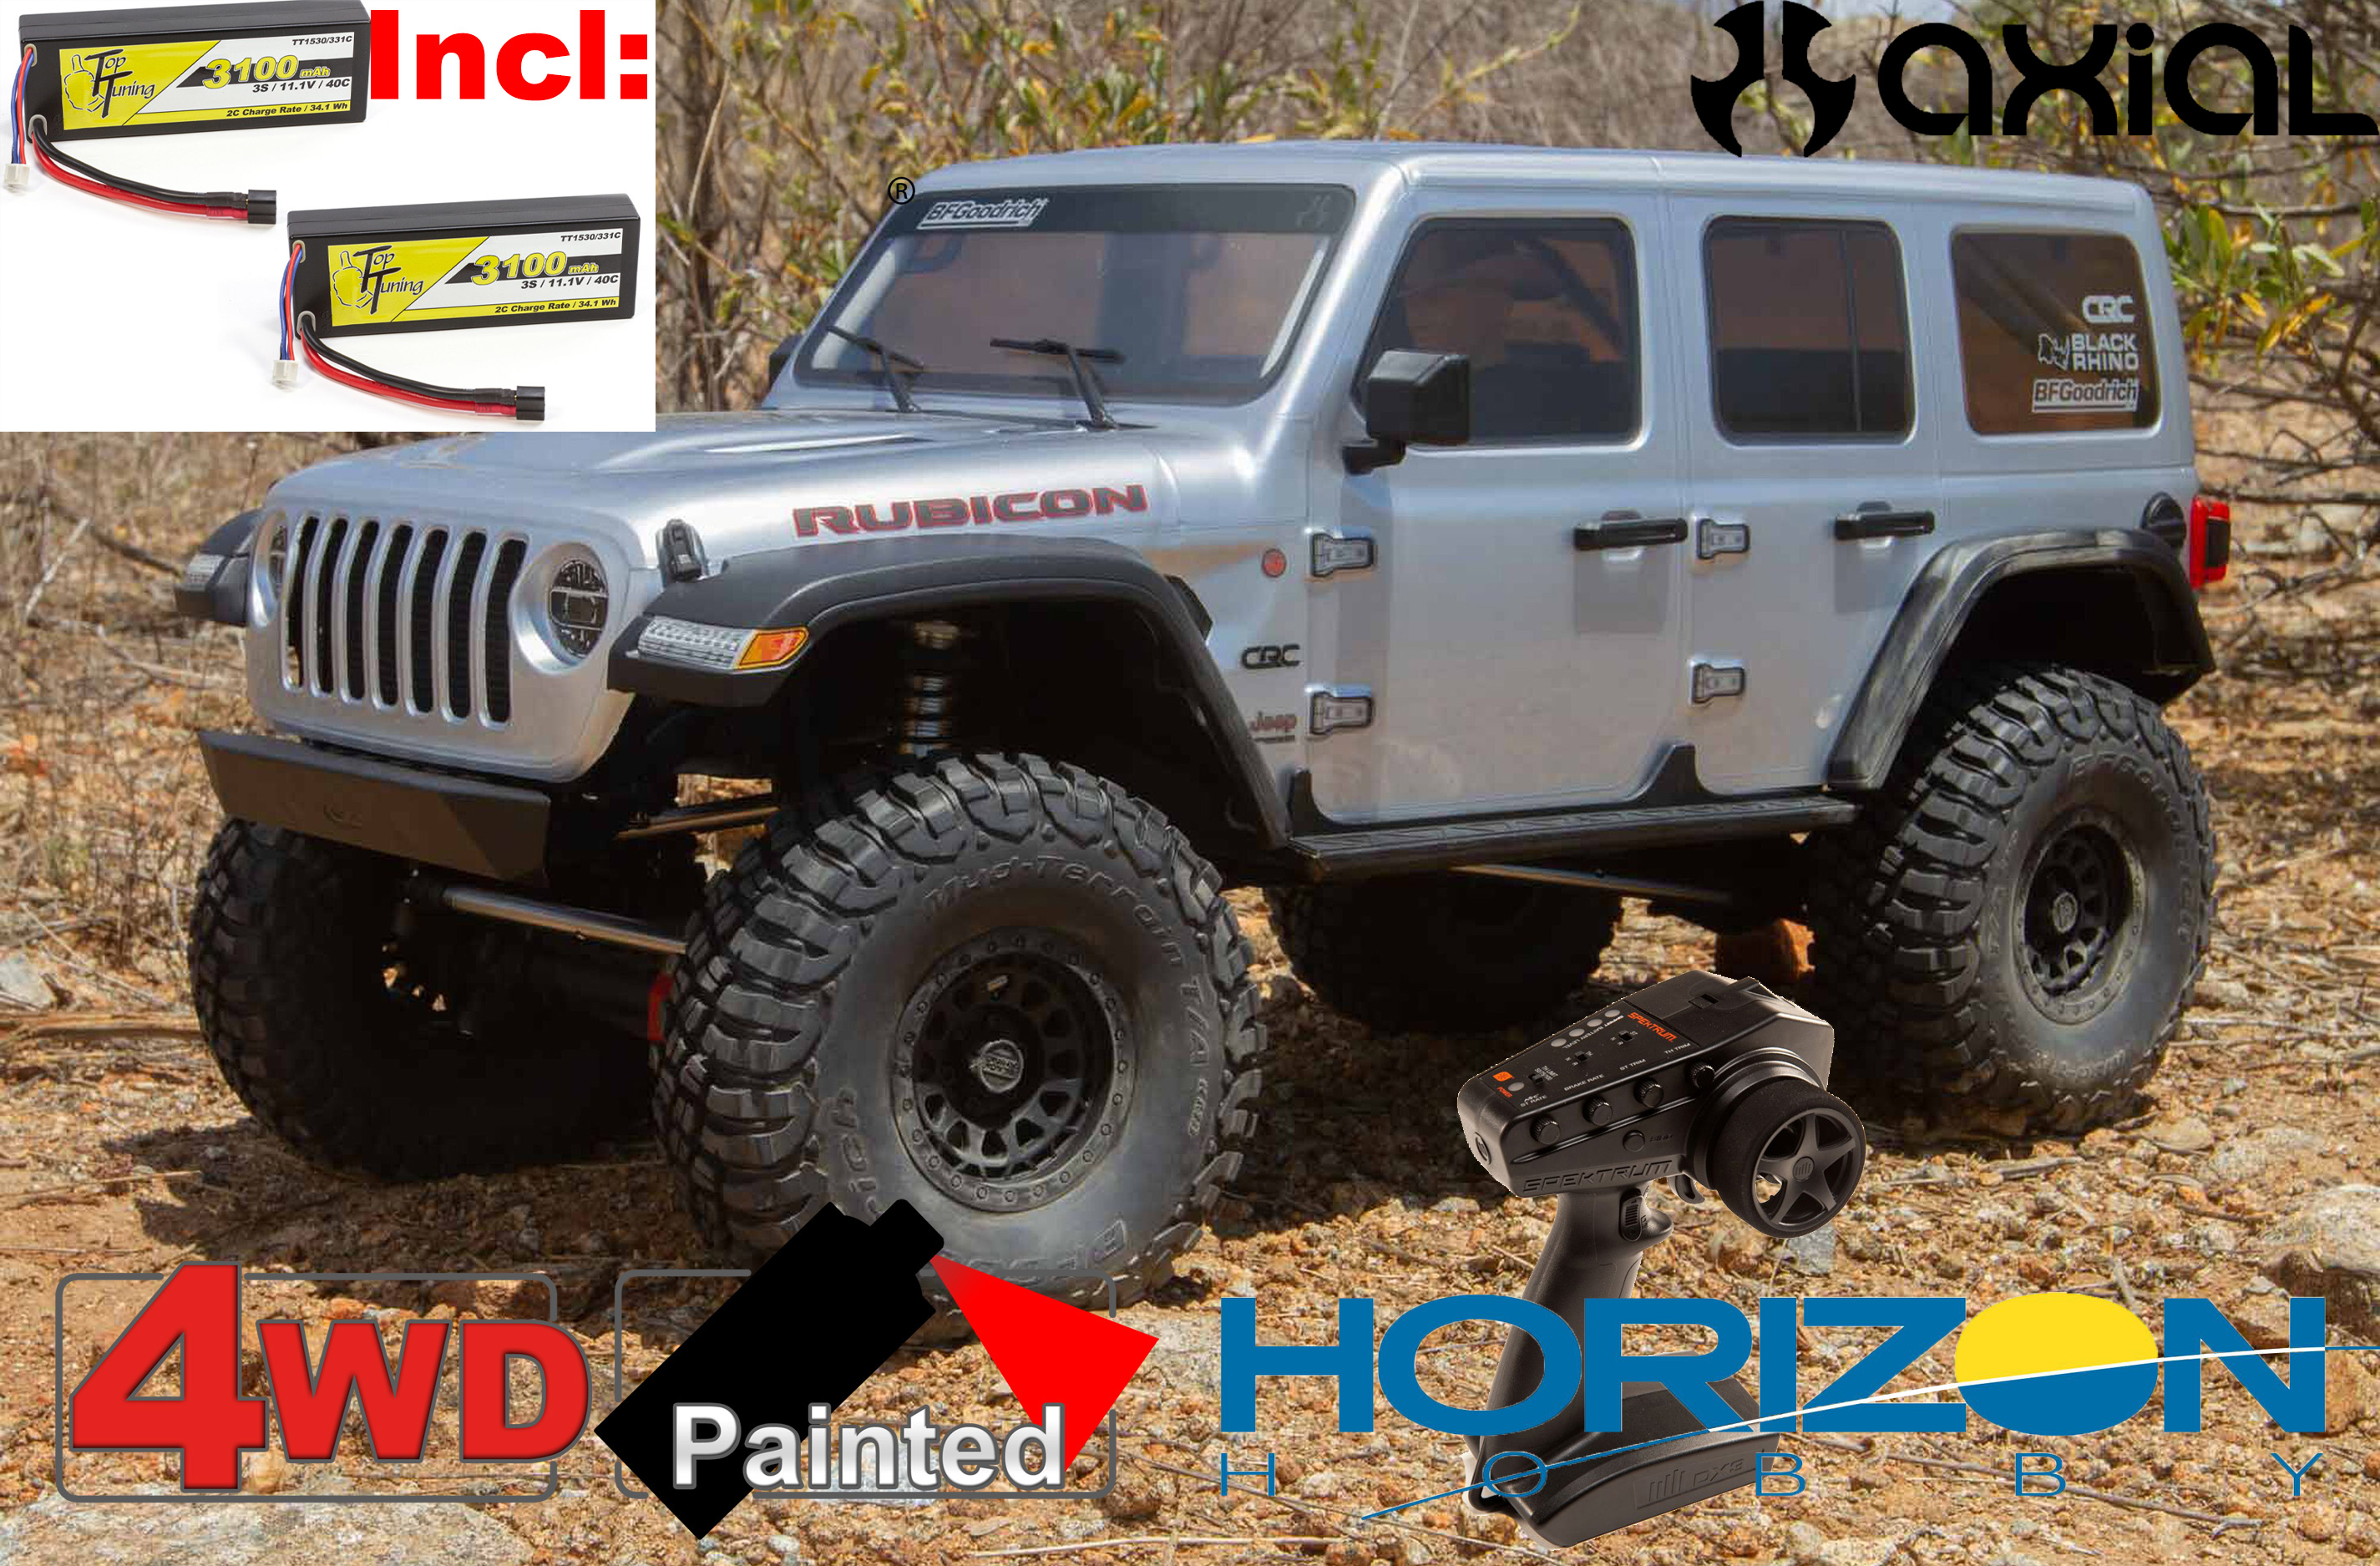 AXI05000T2 axial 1/6 SCX6 Jeep JLU Wrangler 4WD Rock Crawler RTR, silver with 2x TopTuning 3S 3100mAh Batterys